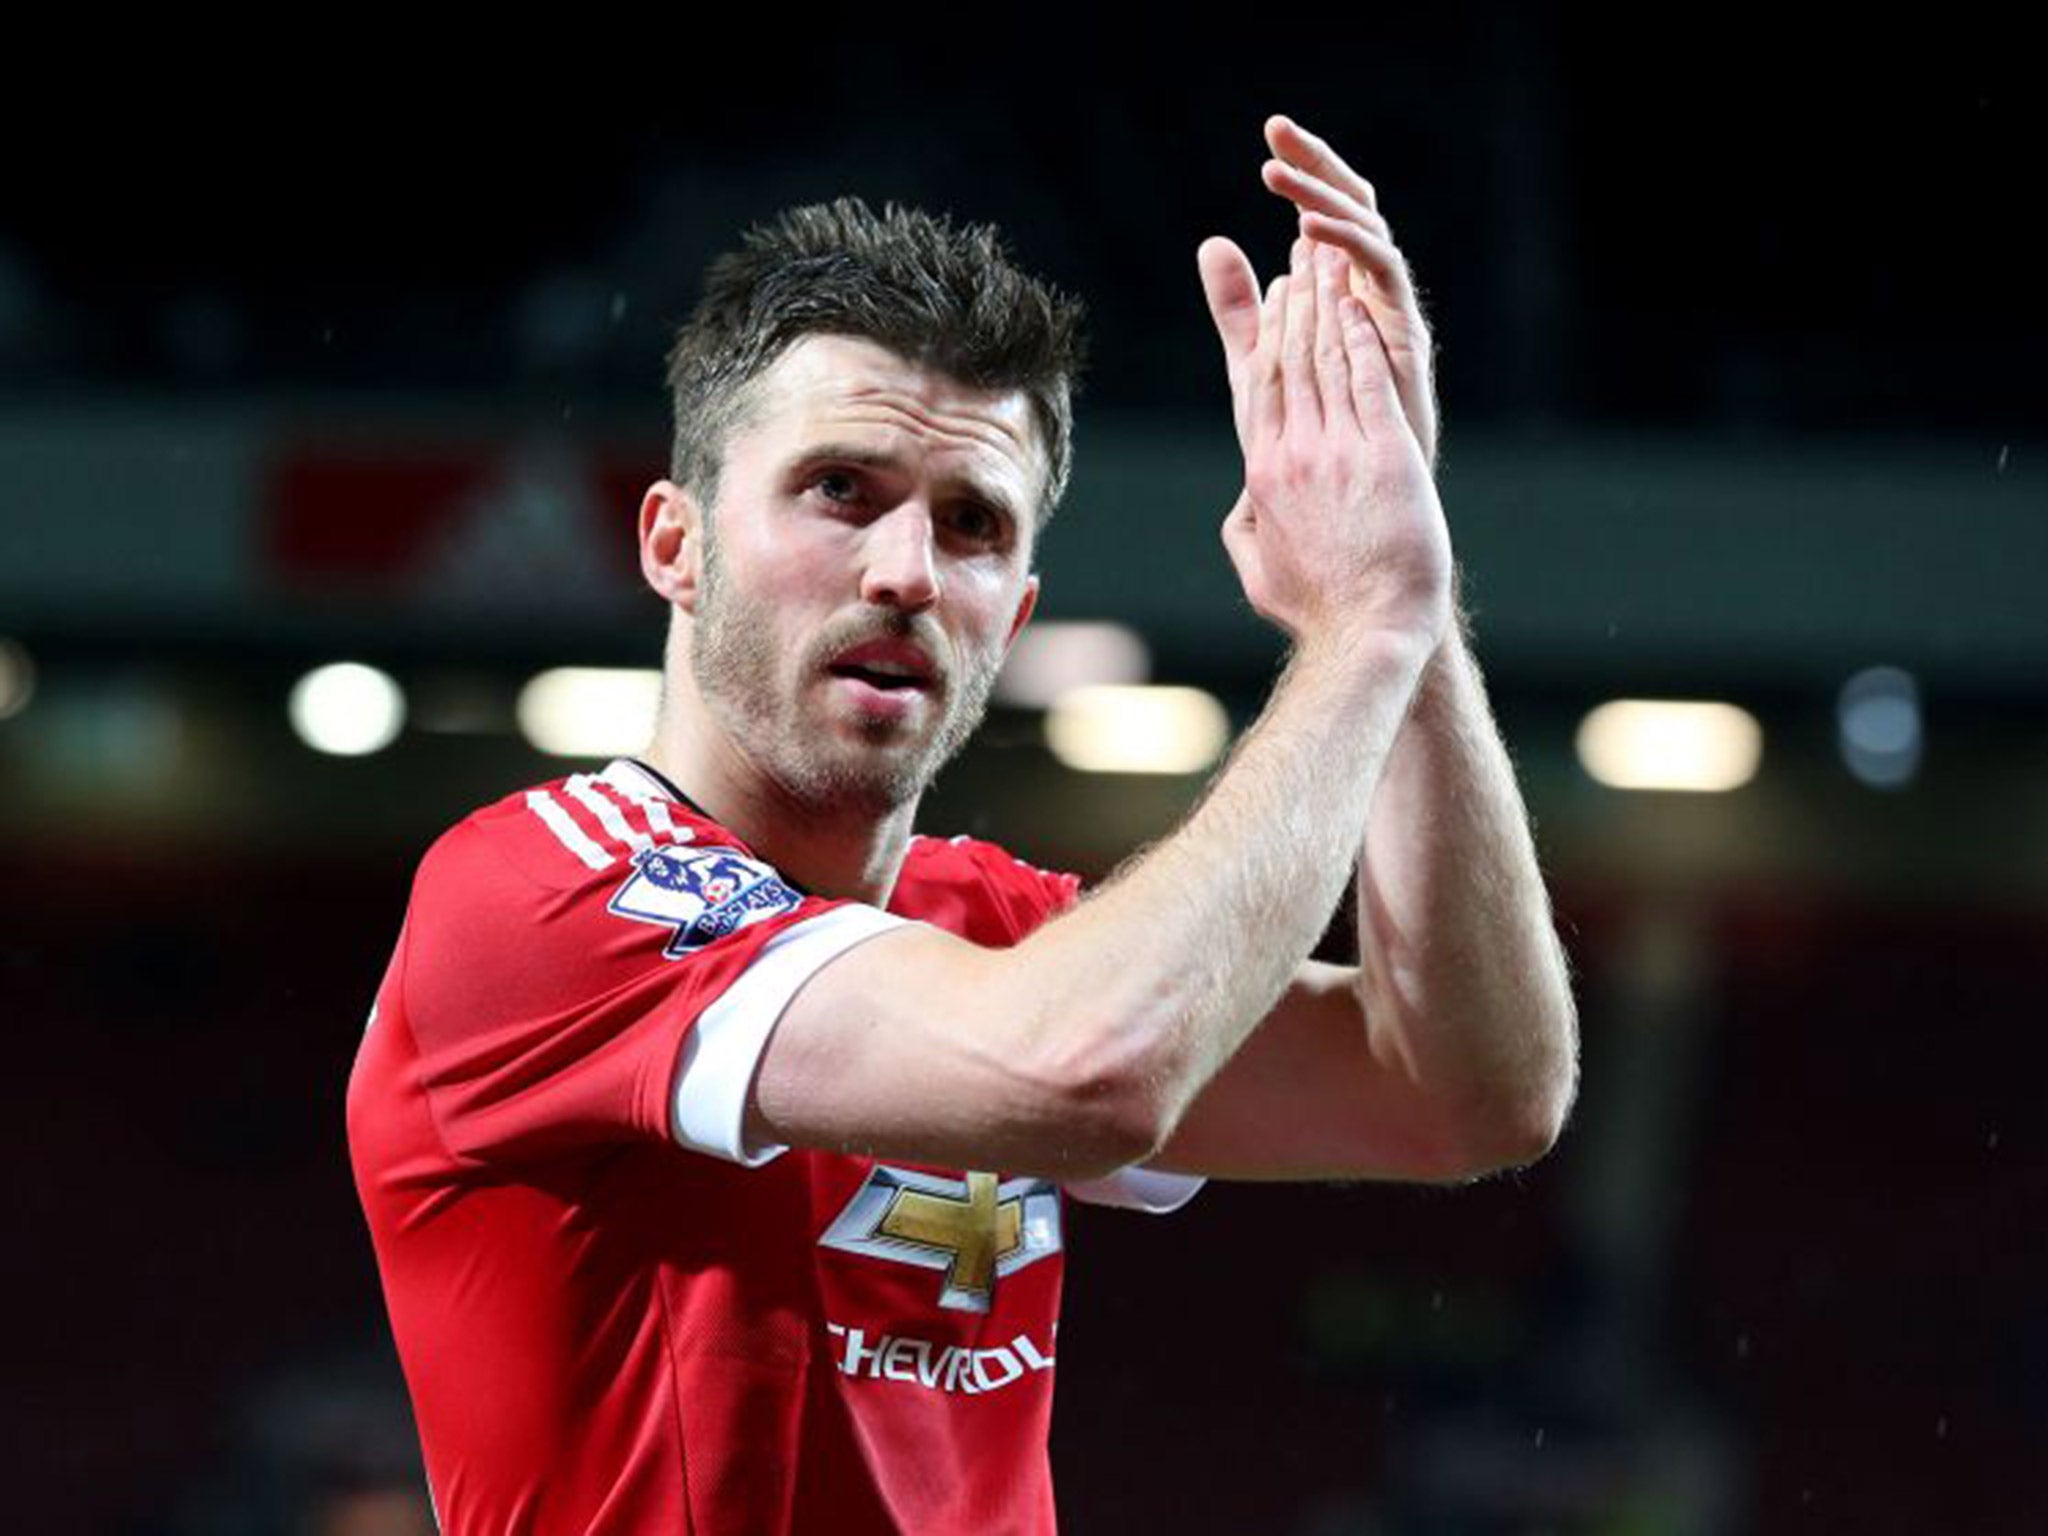 Michael Carrick applauds the Manchester United fans in what could be his final appearance at Old Trafford